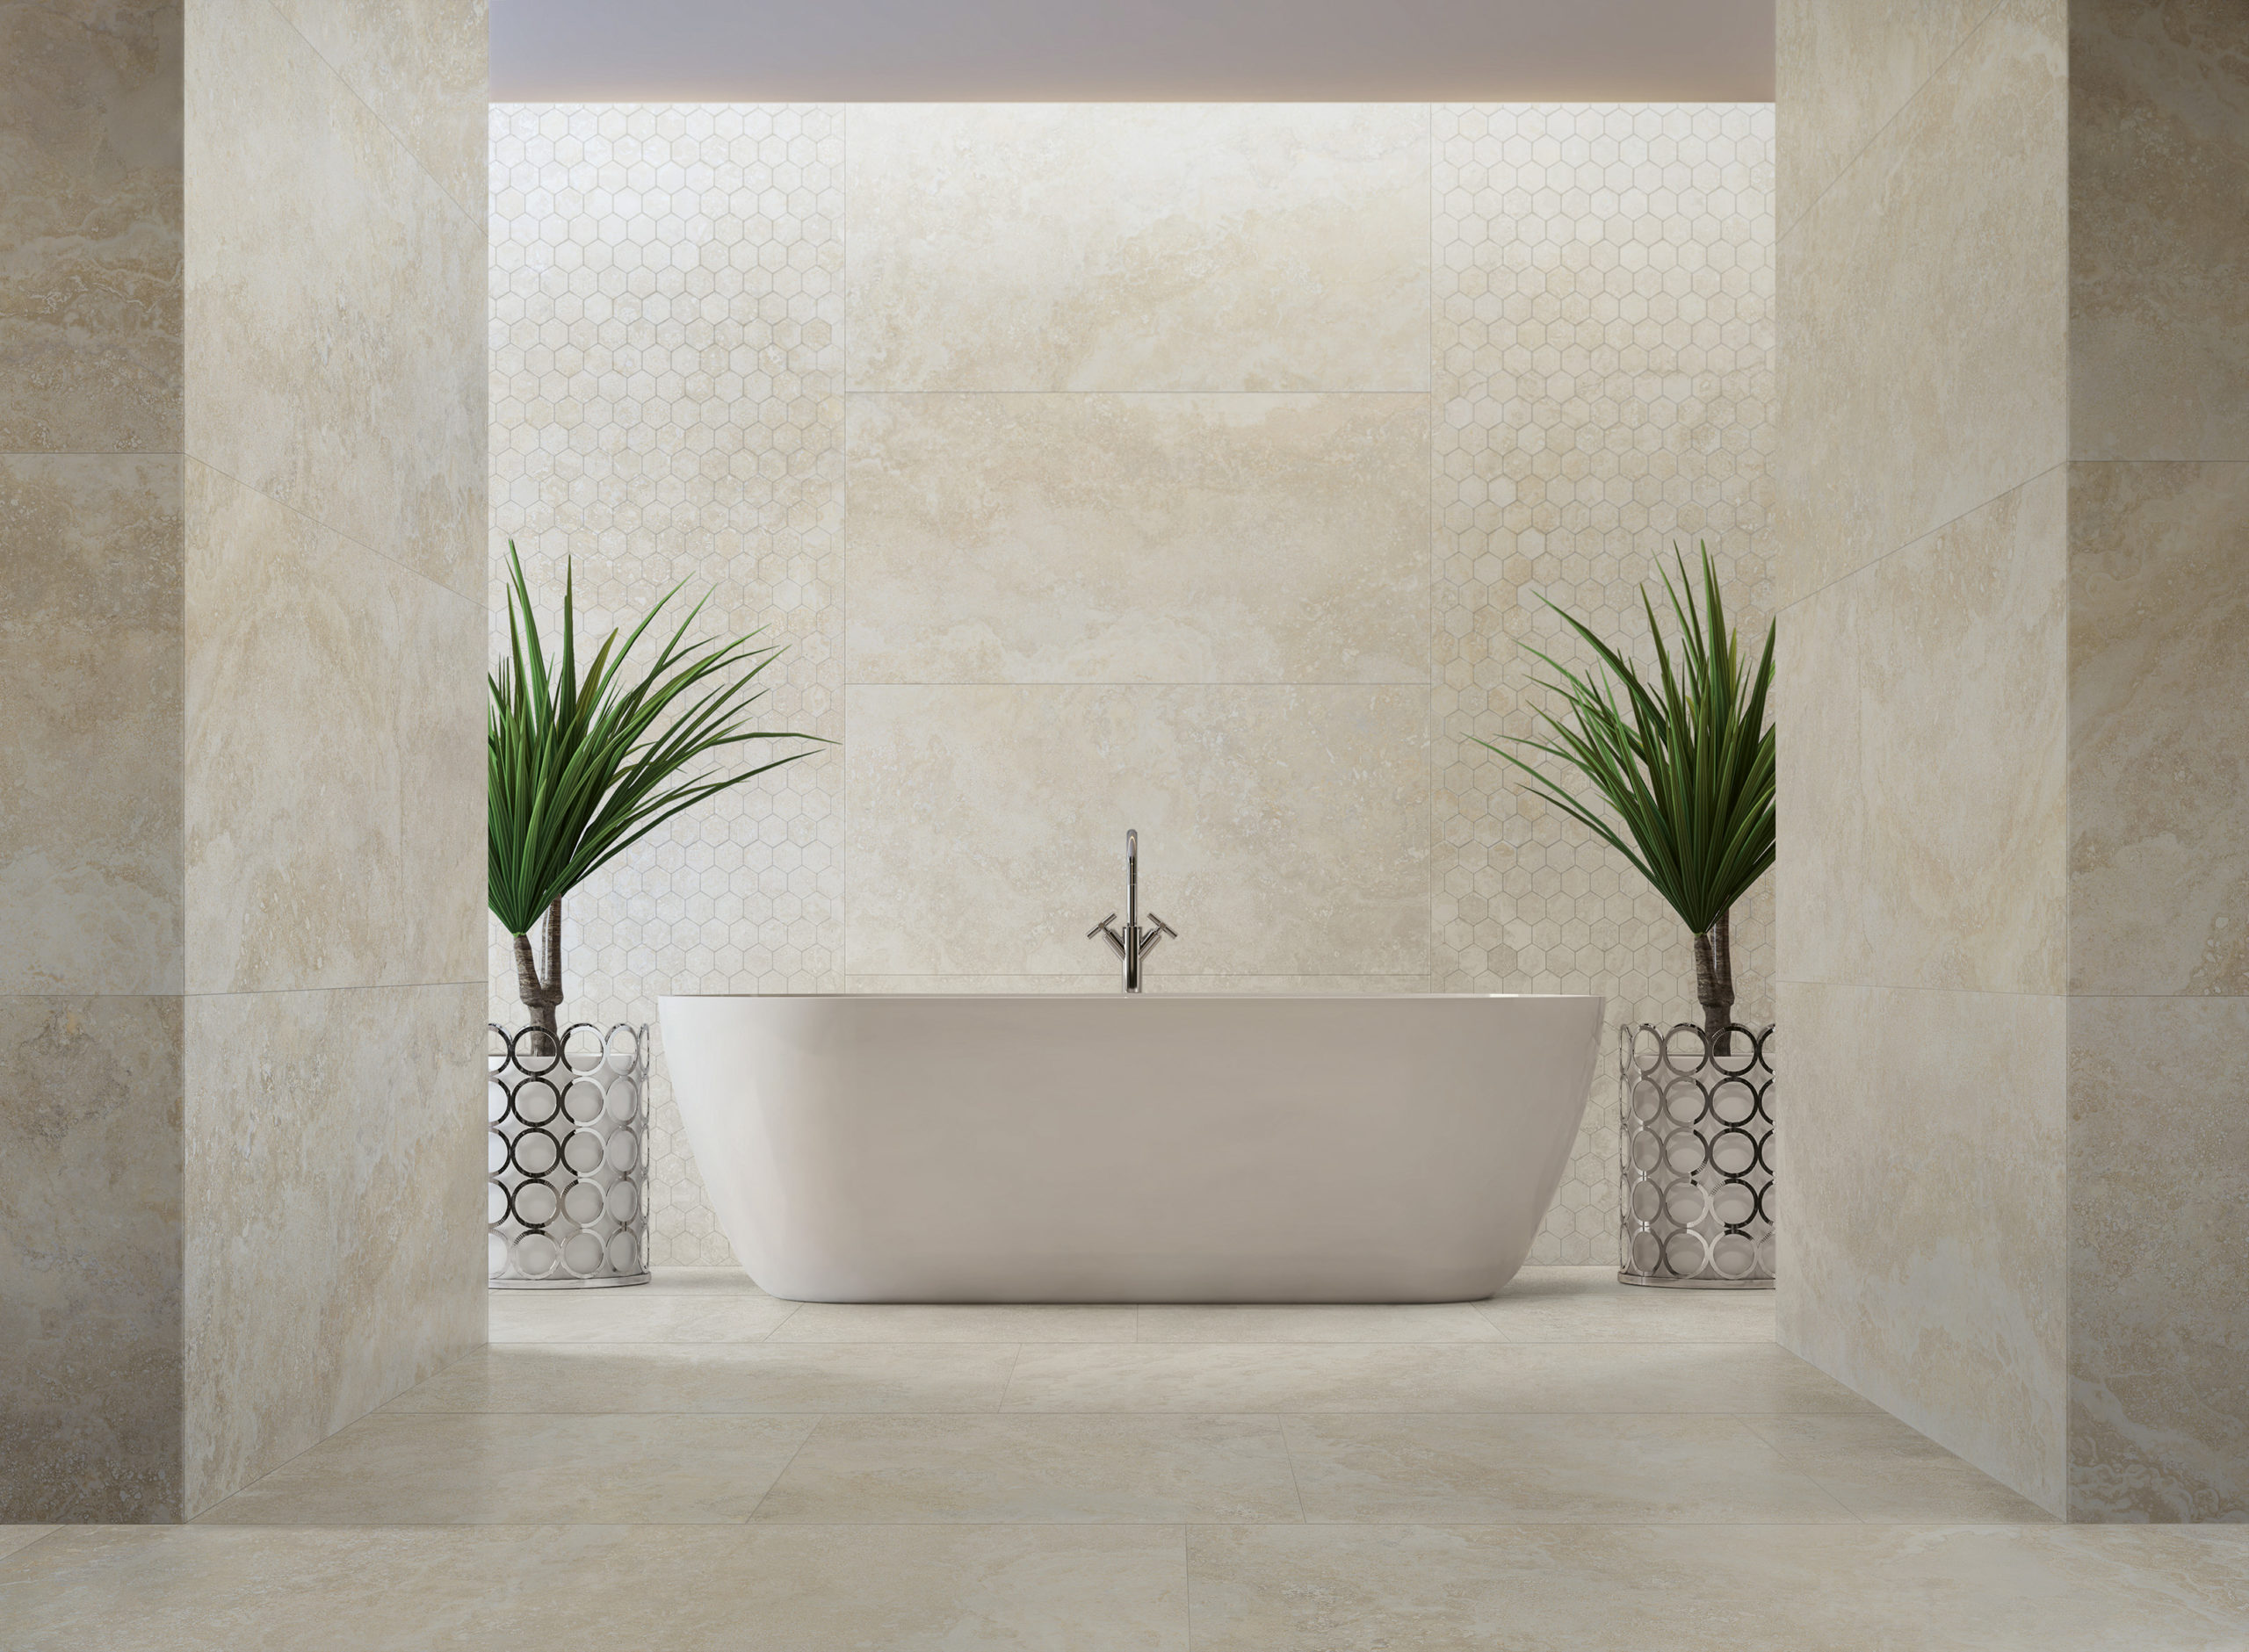 Luxury bathroom 3d render,There are black and white marble tile wall and floor.Decorate with chrome tree pot.